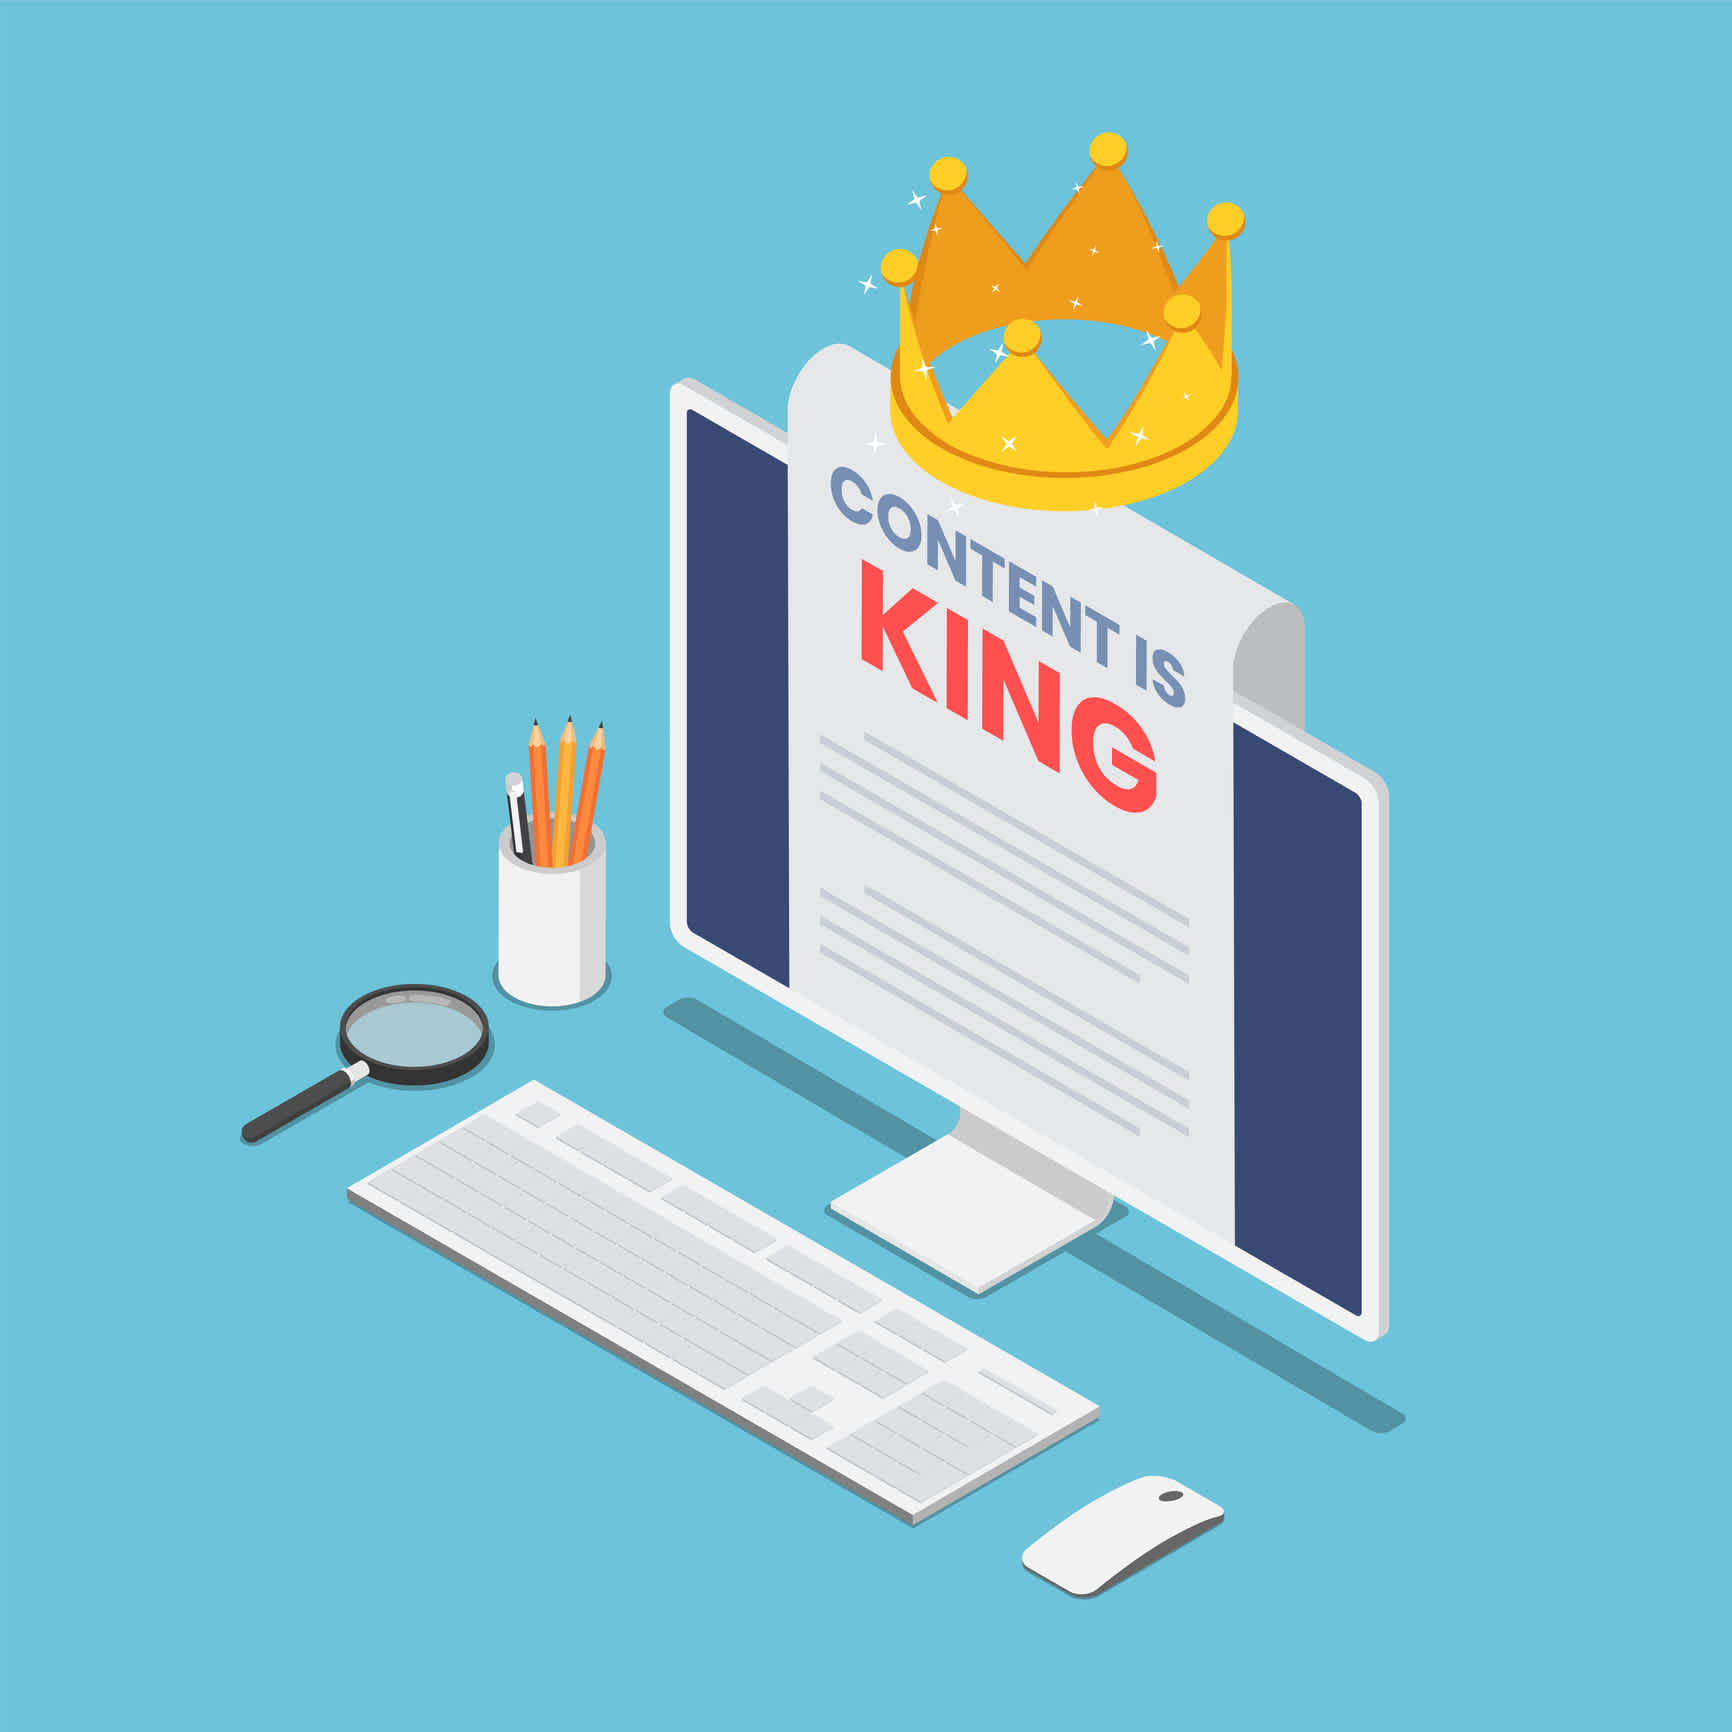 Flat 3d isometric pc monitor with content is king word on paper and crown. Content marketing concept for small businesses. | Watermark